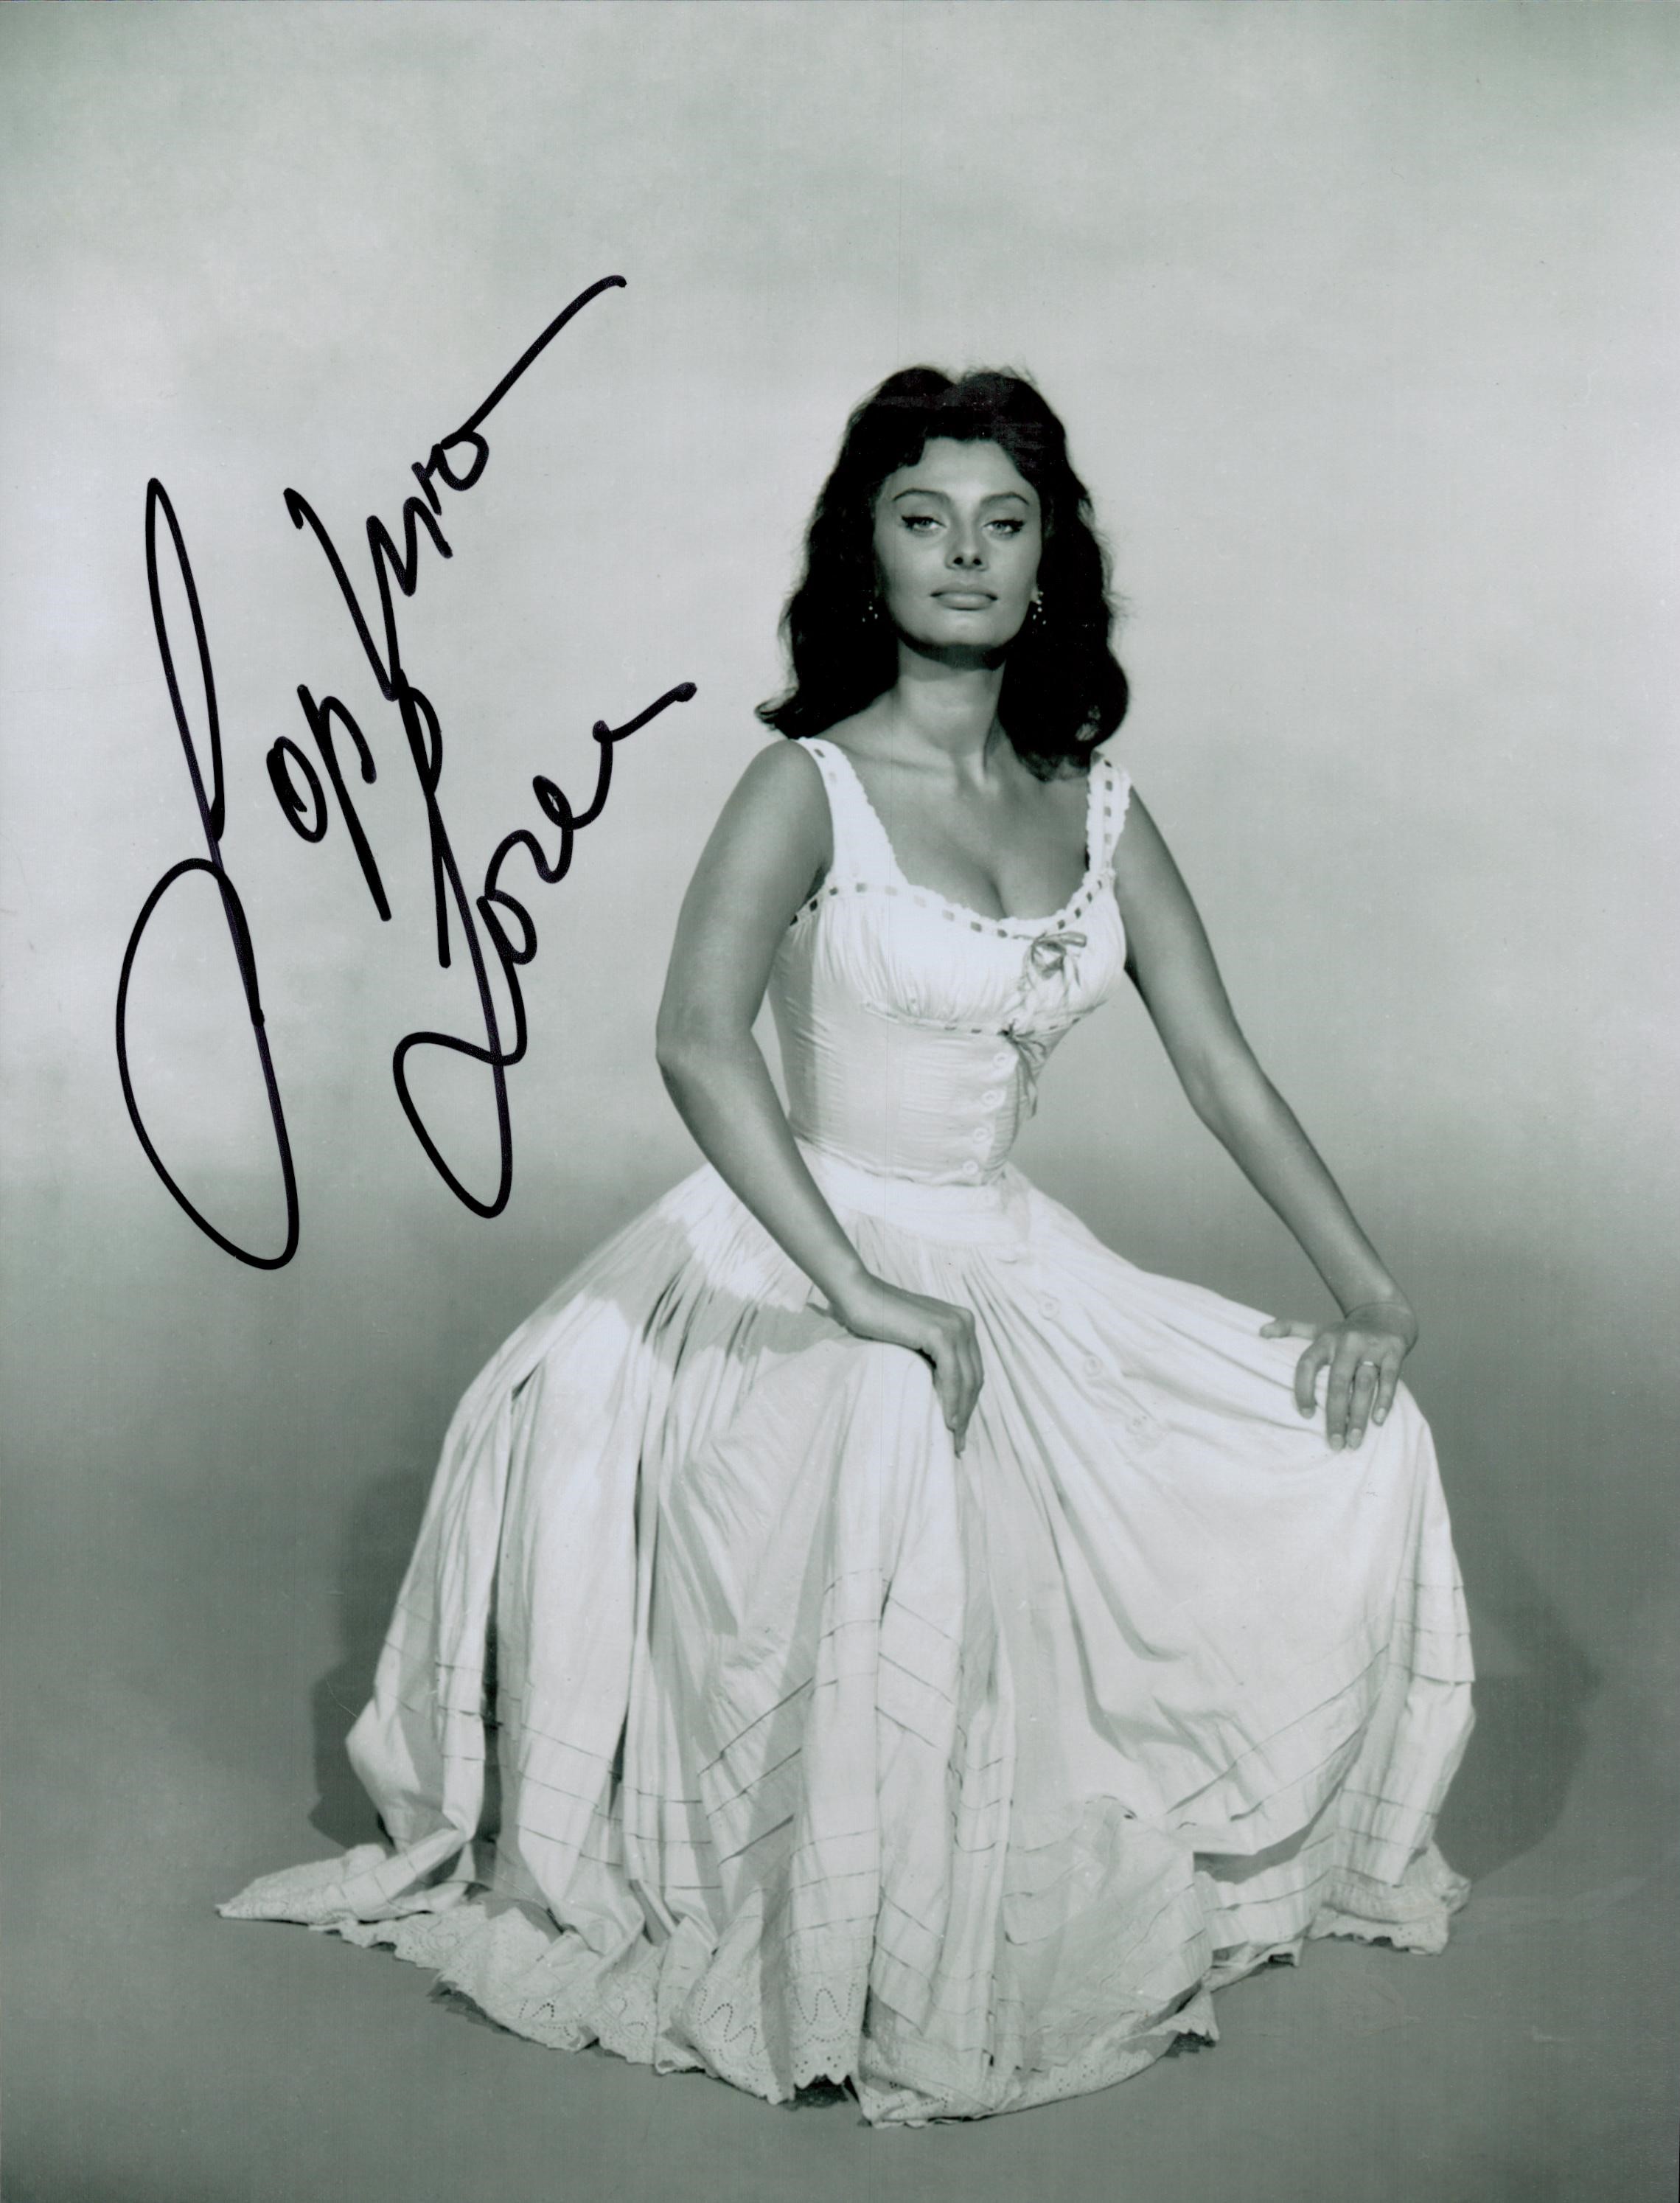 Sophia Loren signed 10x8 black and white photo. Loren is an Italian actress. She was named by the